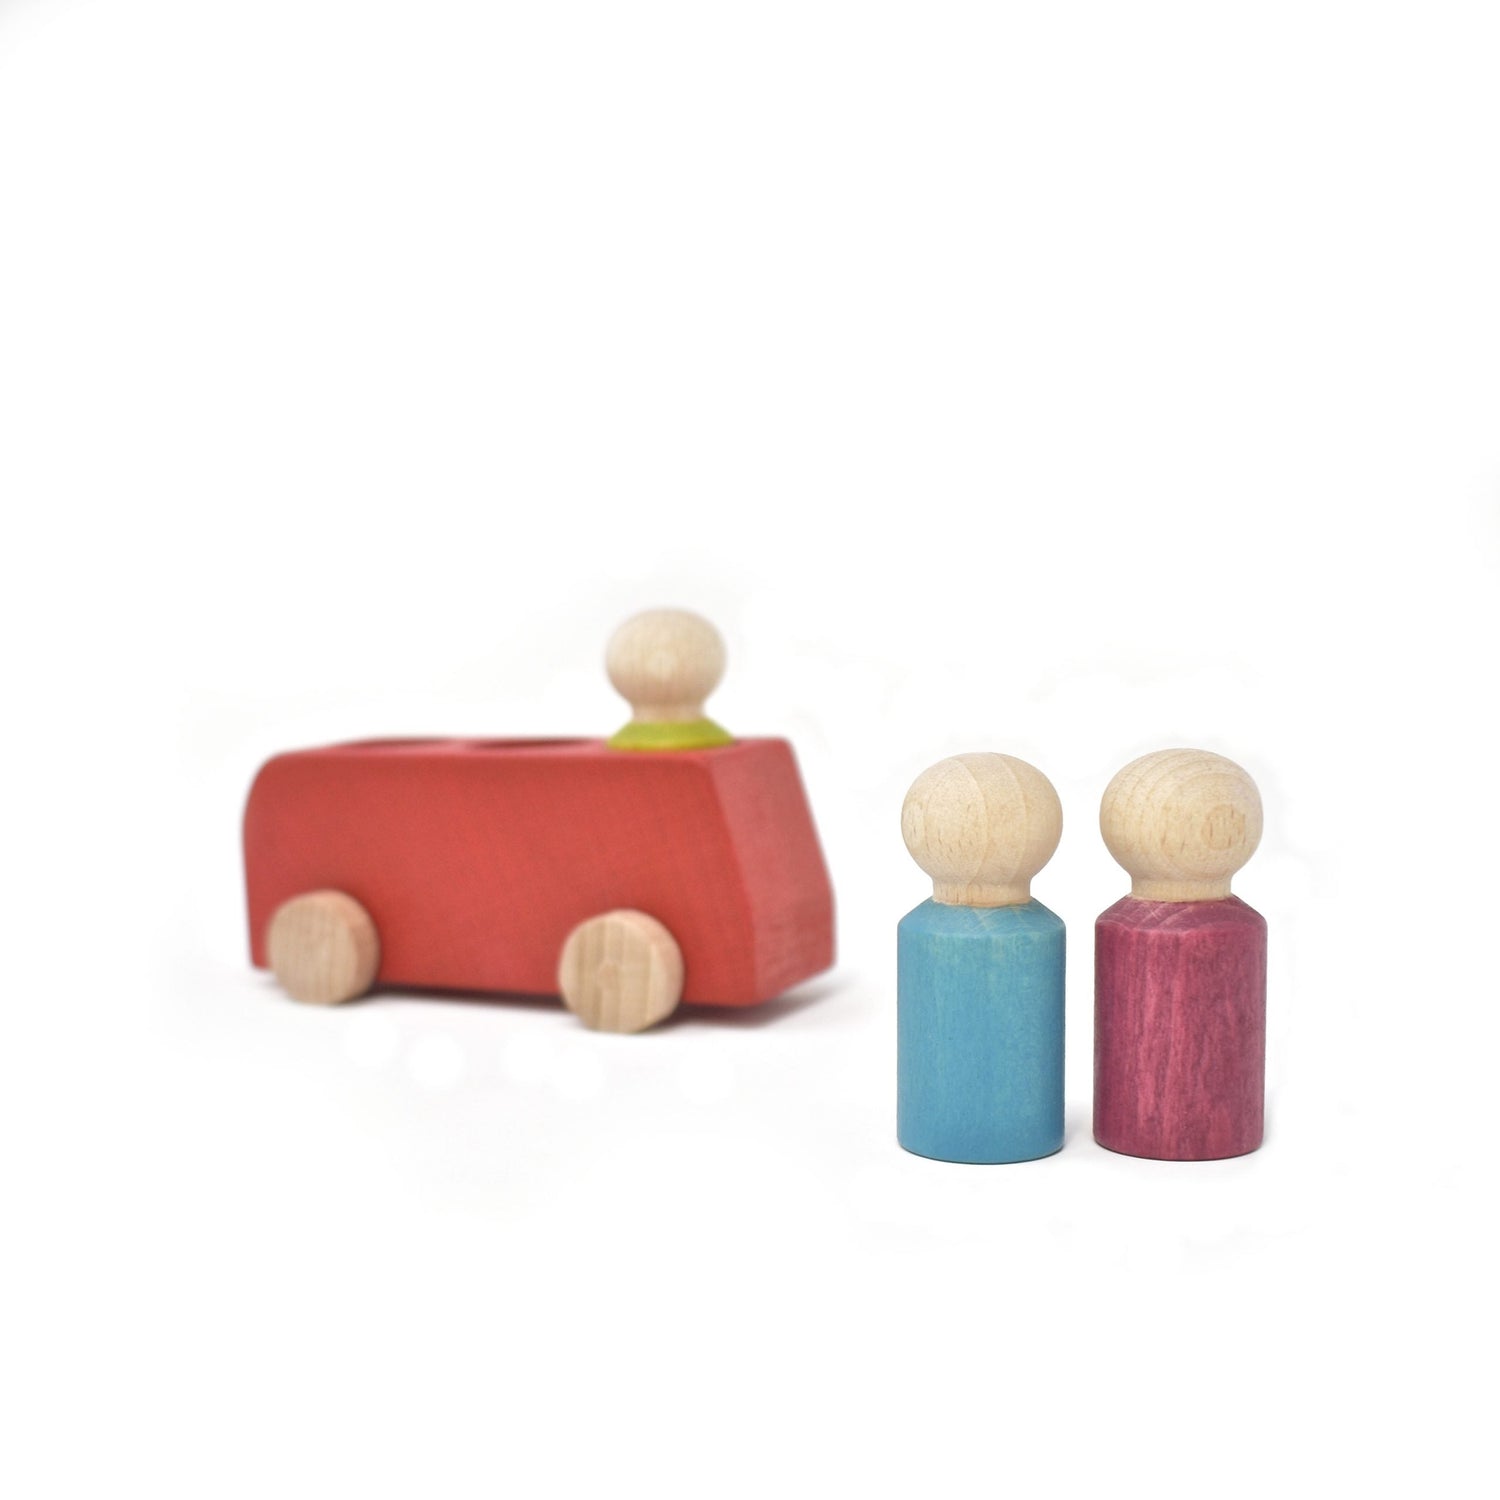 LUBULONA BUS Red by LUBULONA - The Playful Collective